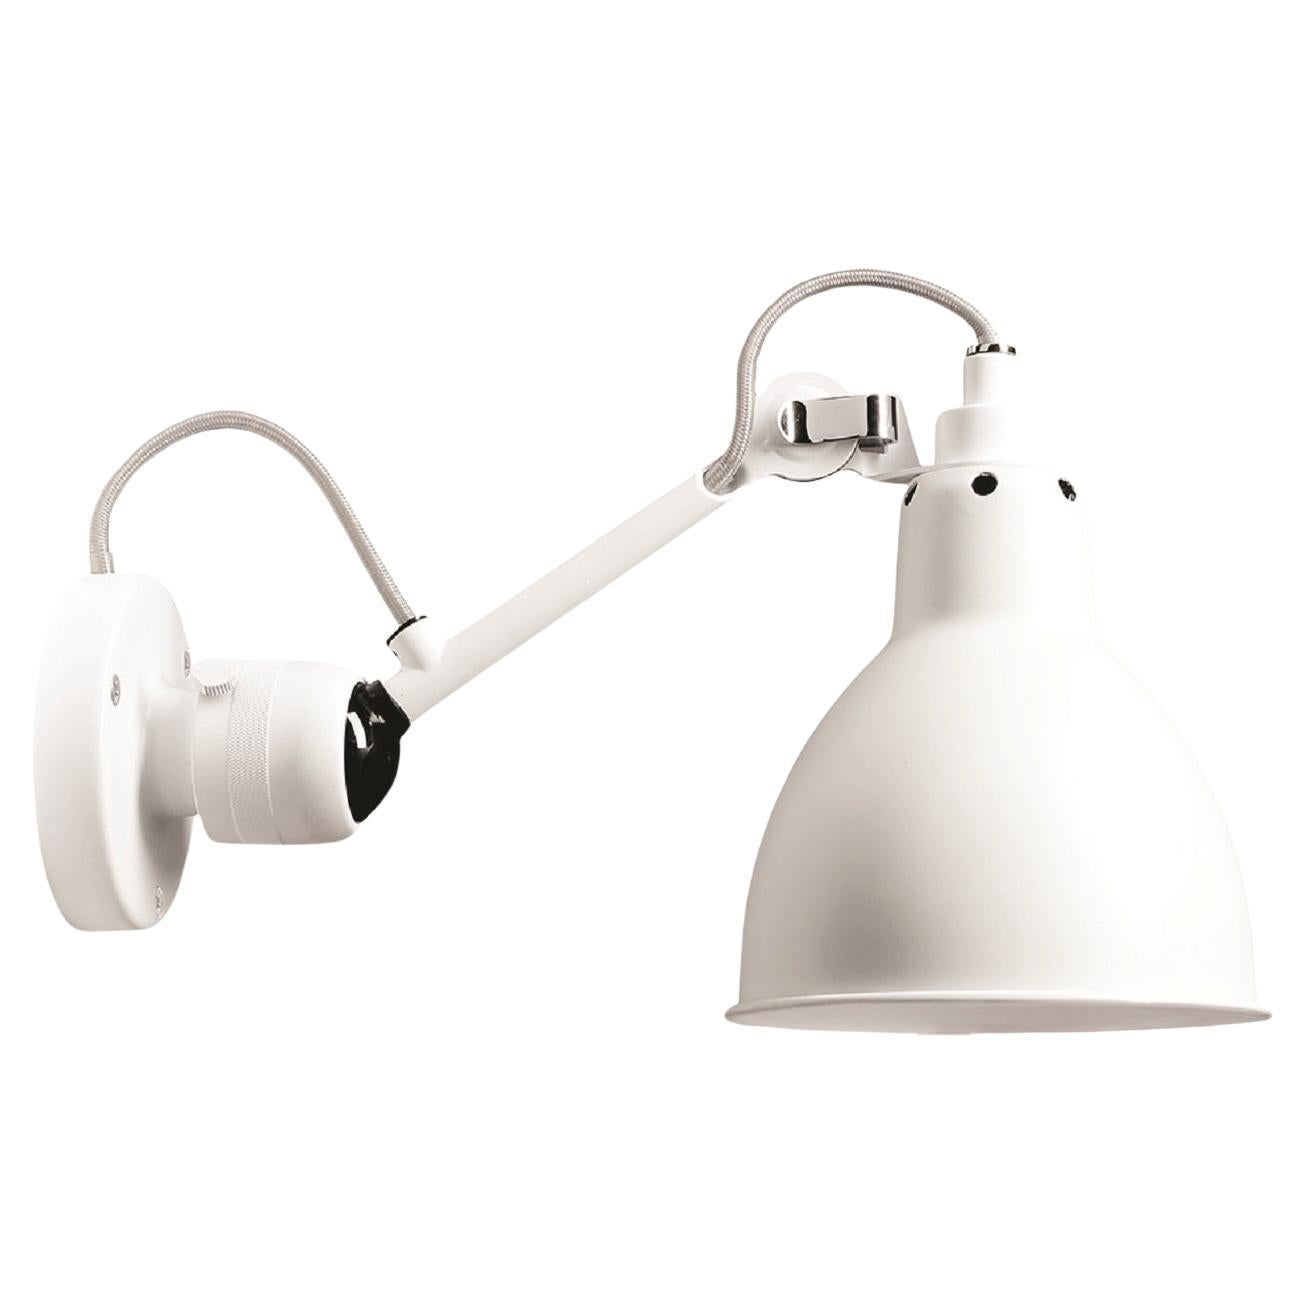 DCW Editions La Lampe Gras N°304 Wall Lamp in White Arm and White Shade